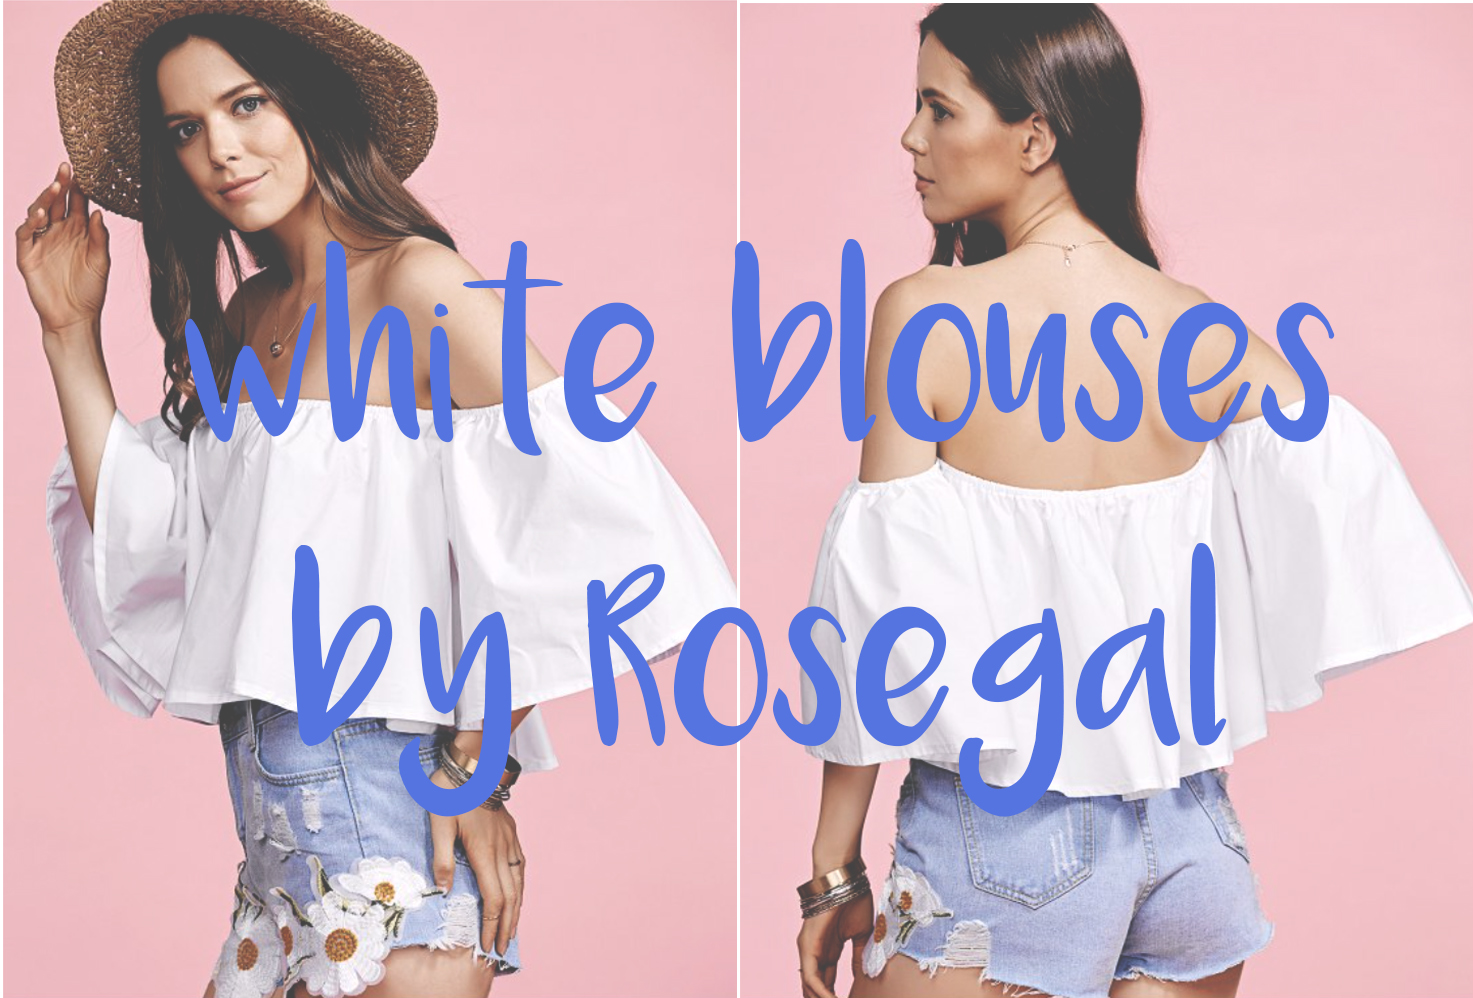 Features: White Blouses by Rosegal - Not for Ordinary People